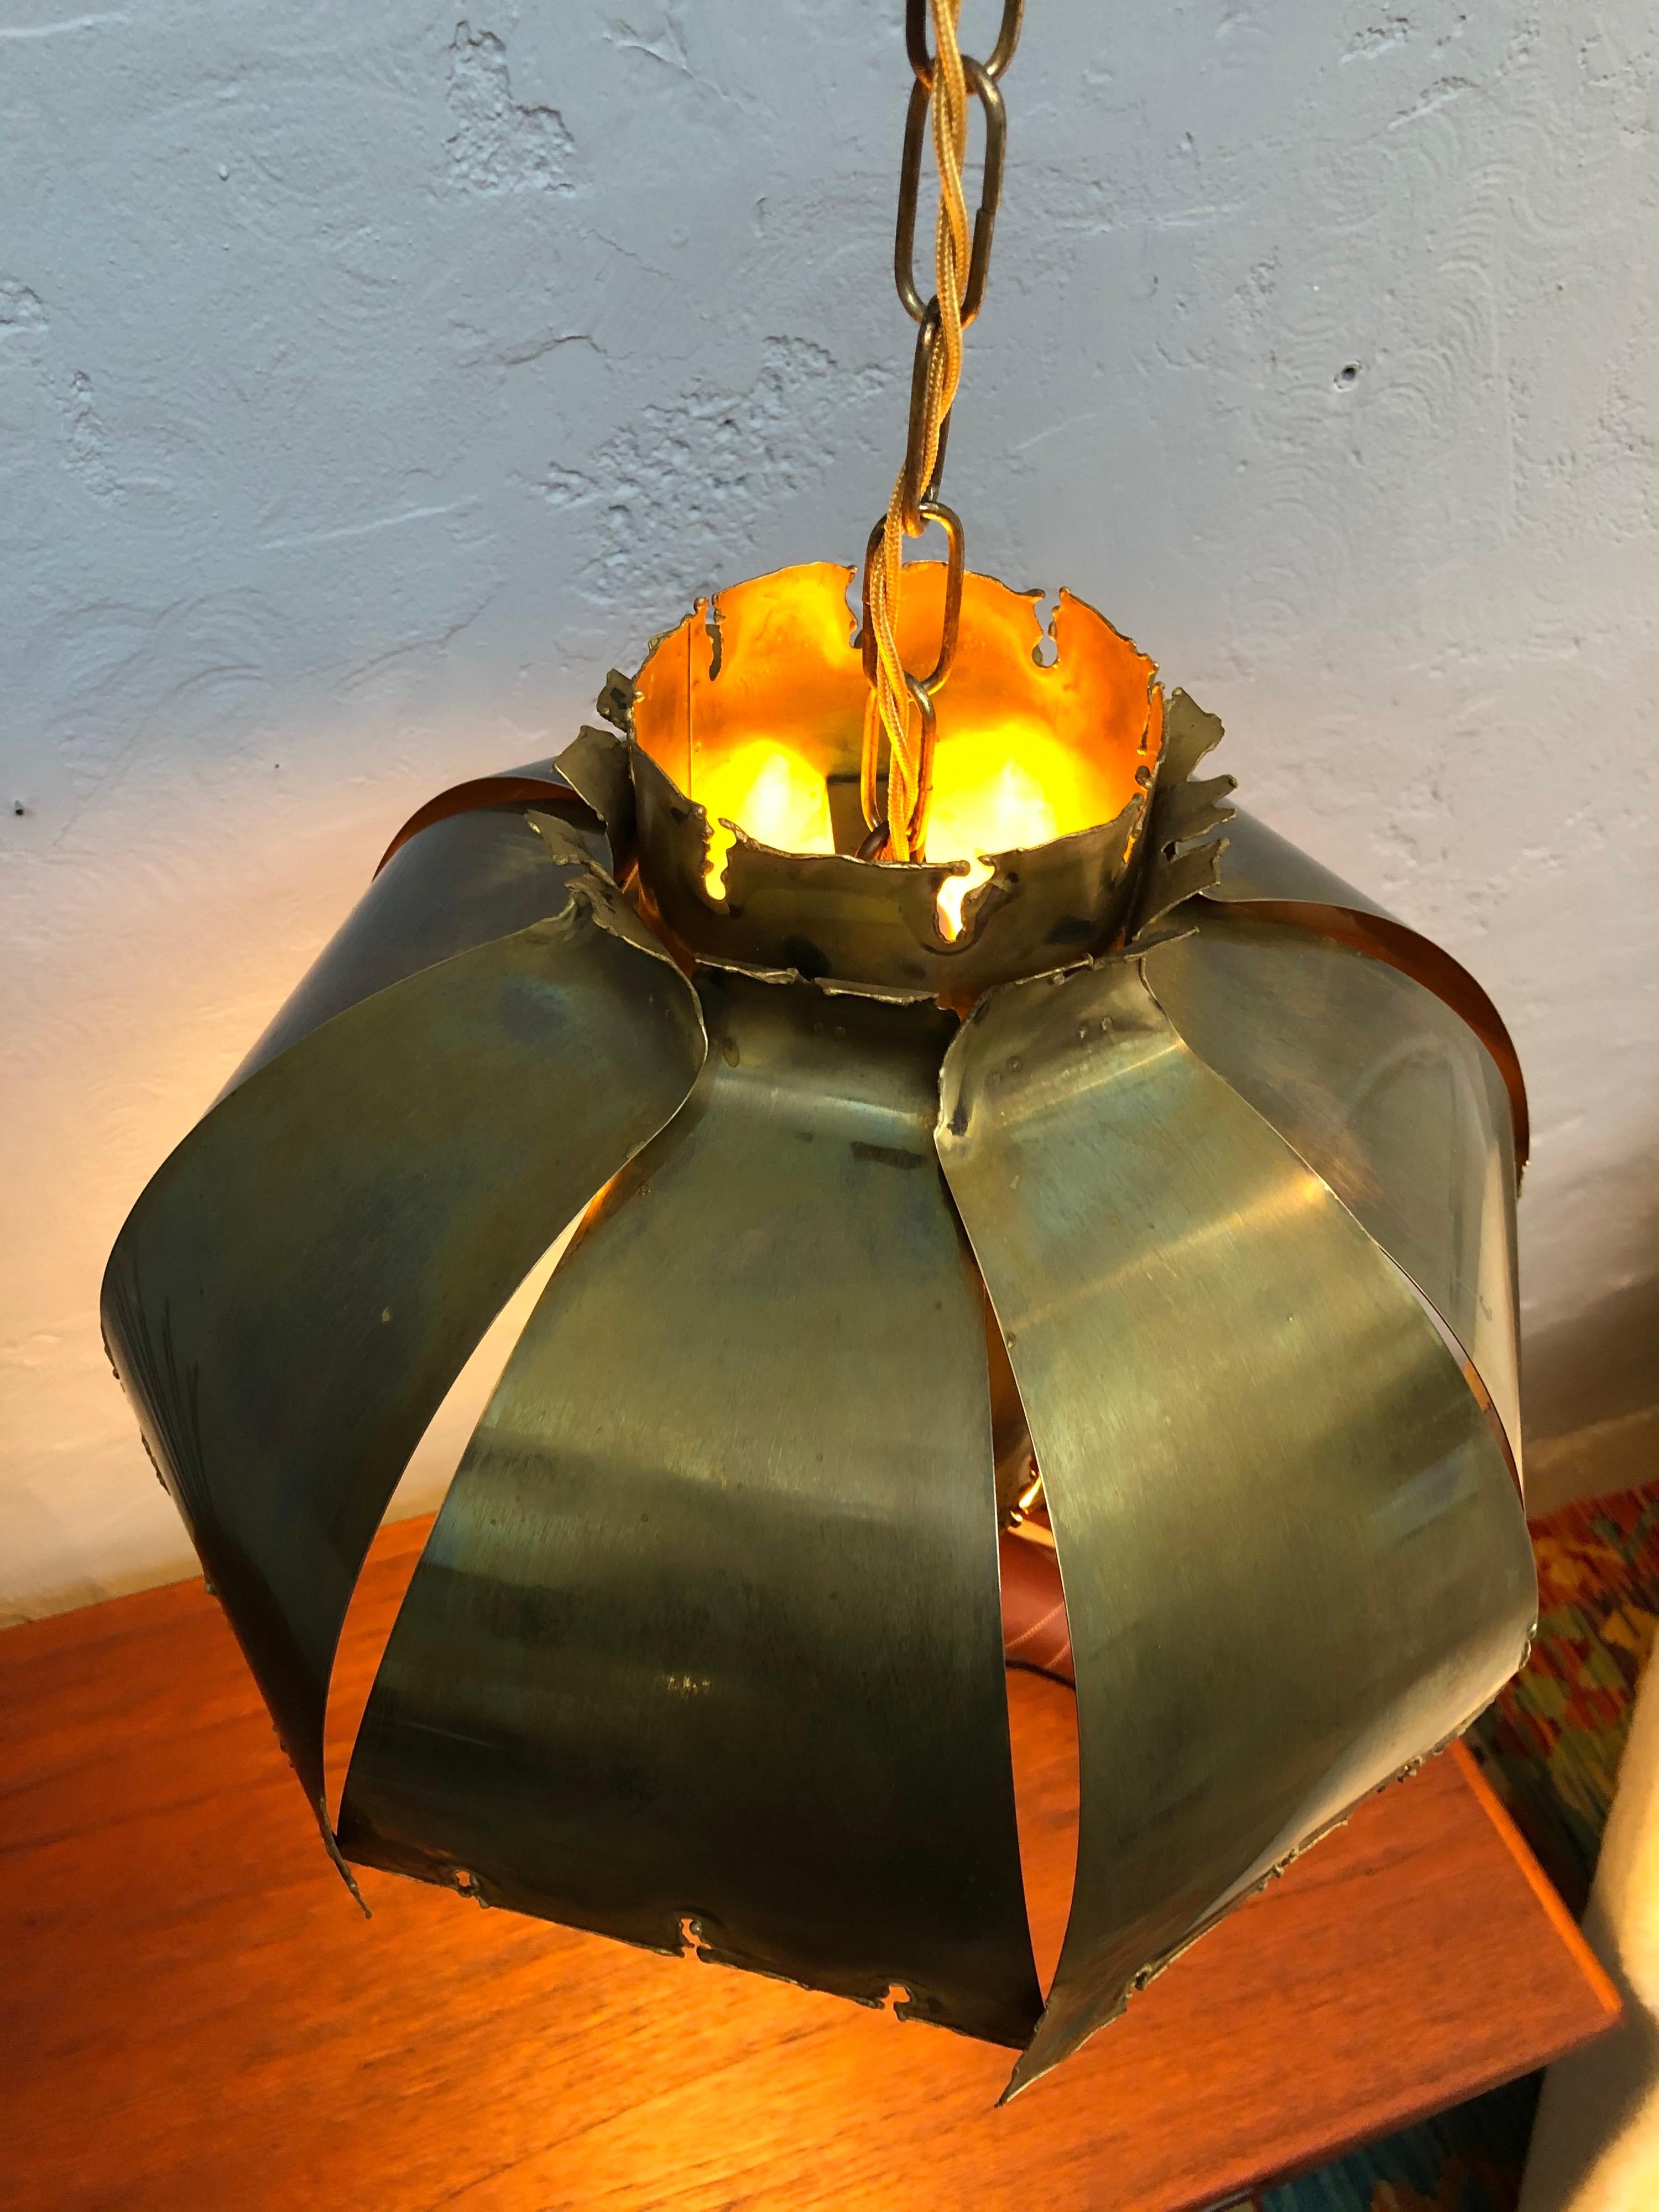 Vintage Svend Aage Holm Sørensen for Holm Sørensen & Co pendent chandelier lamp.
This classic piece of brutalist lighting is made up of two layers of torch cut brass.
The Danish designer Svend Aage Holm-Sørensen (1913-2004) possessed as an artist a